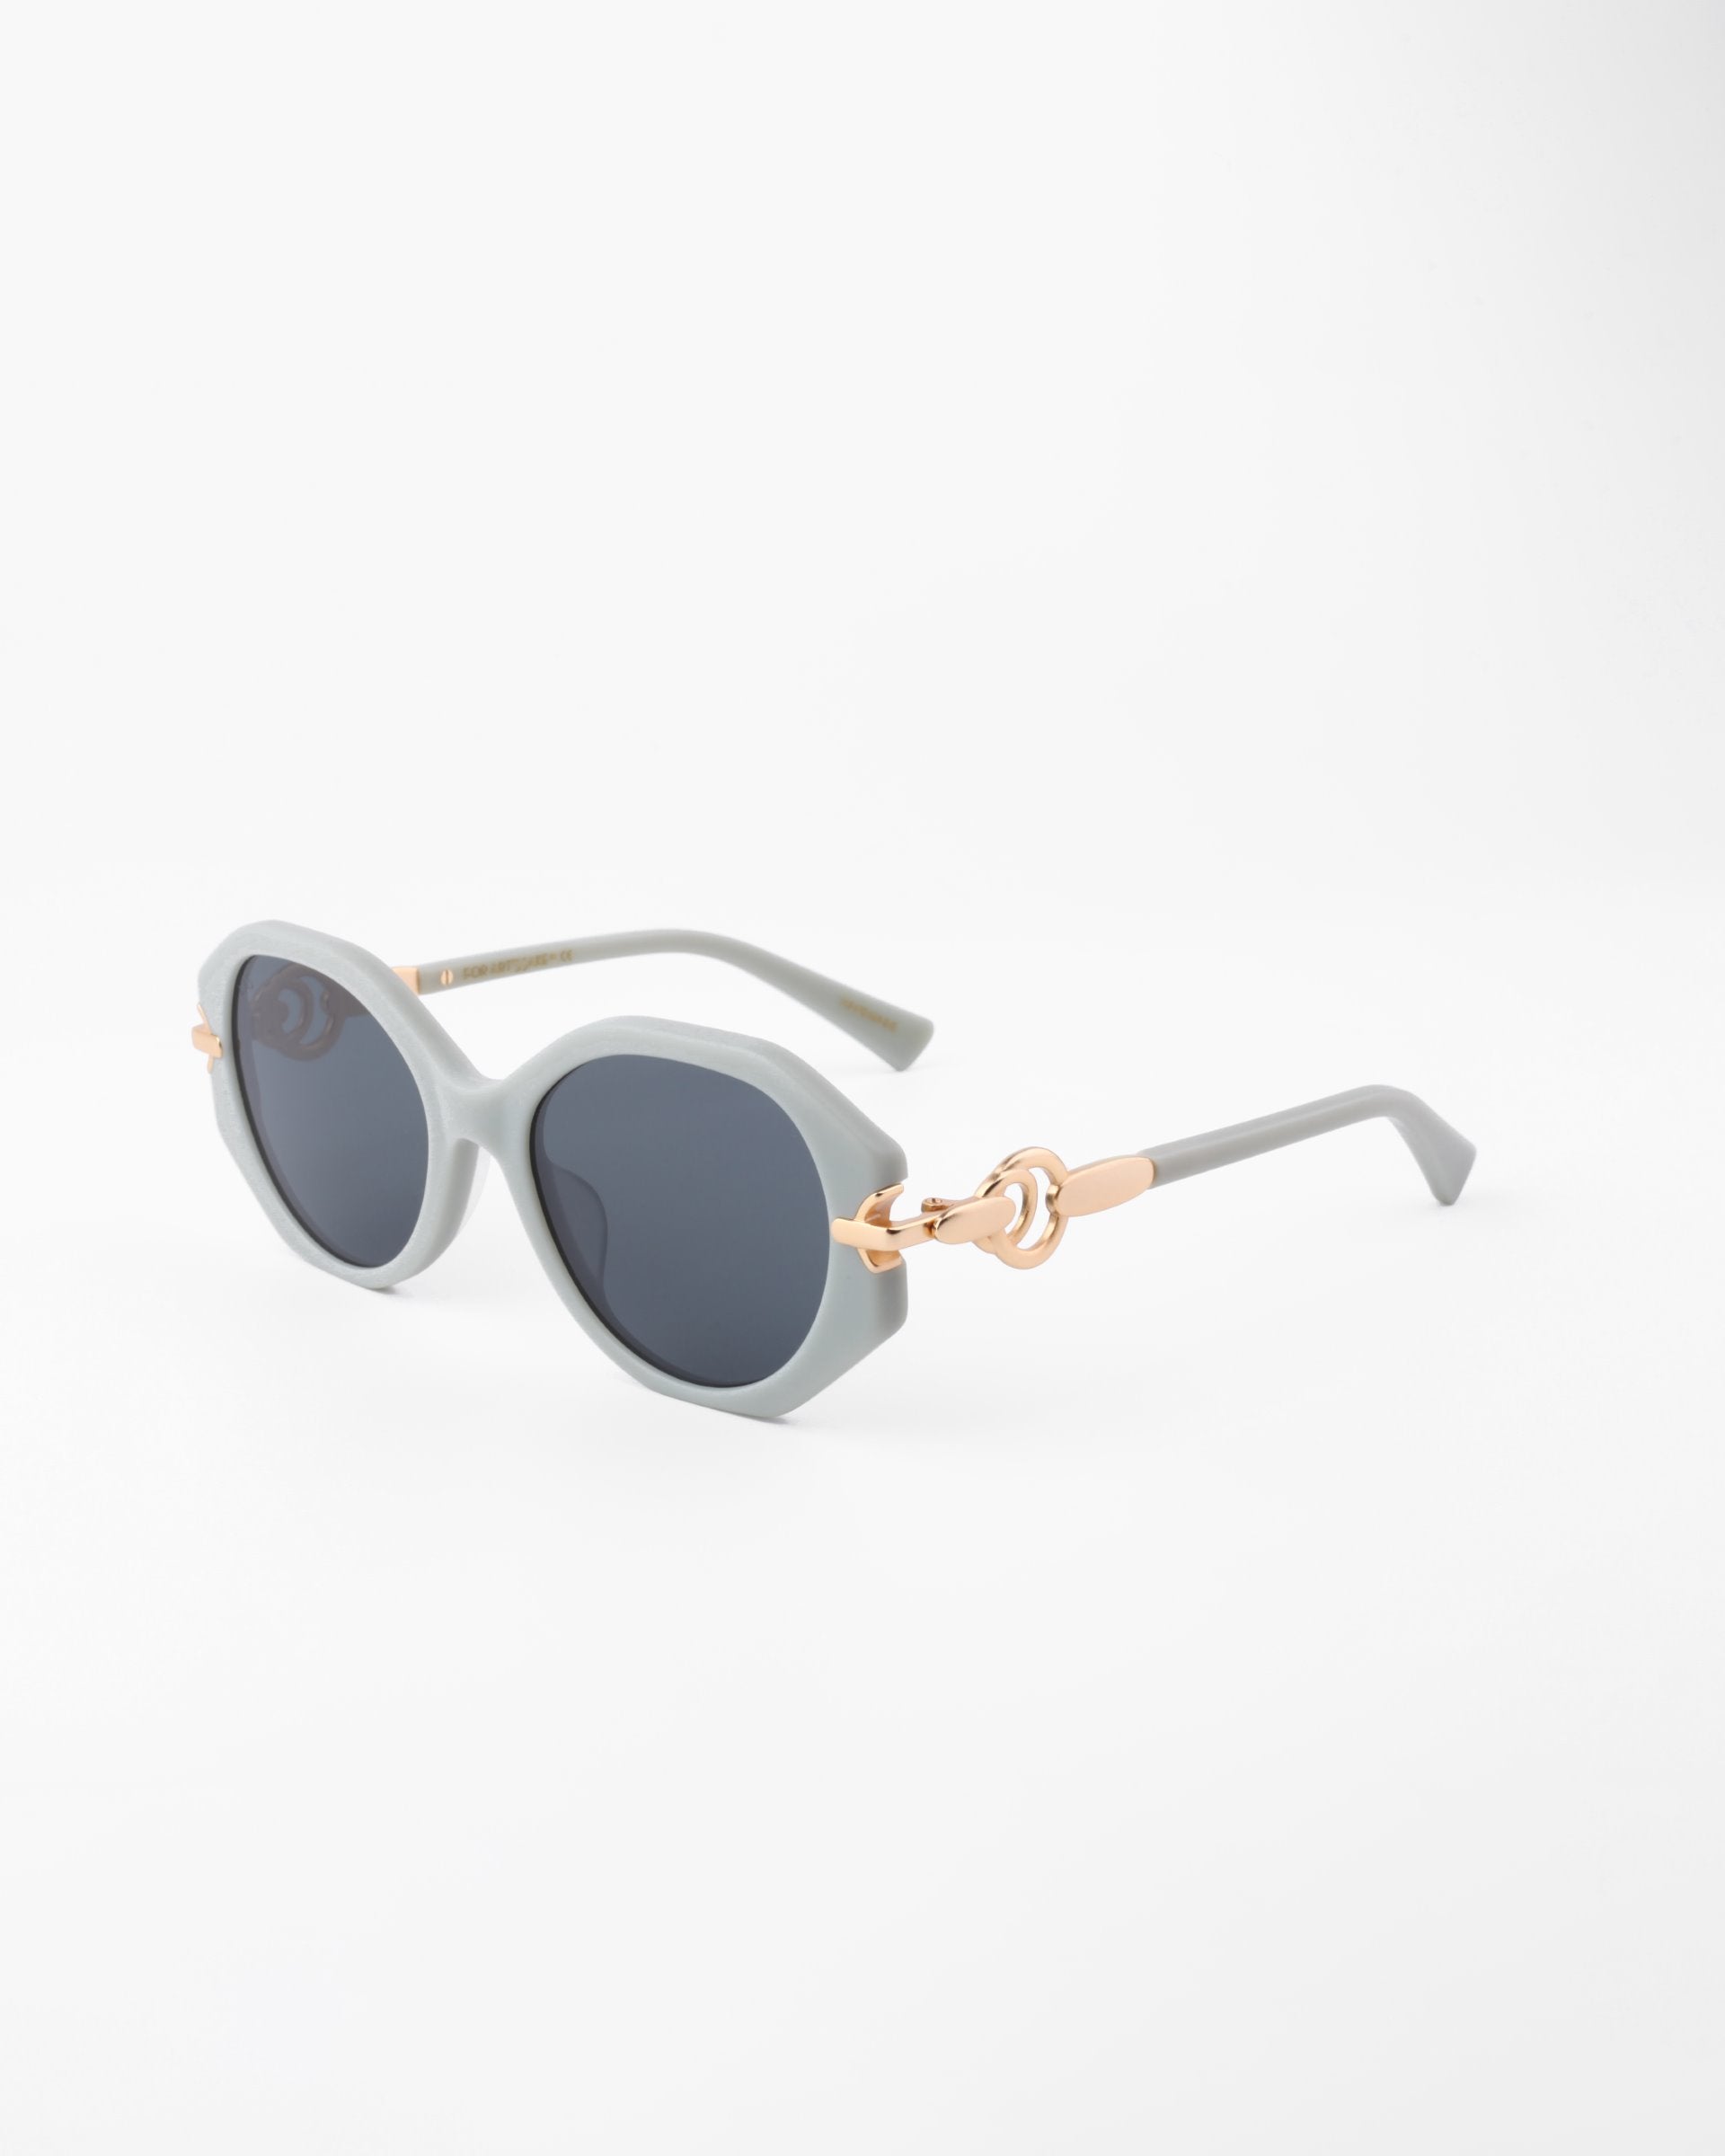 A pair of stylish Seaside sunglasses by For Art&#39;s Sake® featuring round black lenses with a light gray, semi-translucent, handmade acetate frame. The temples have gold-plated detailing near the hinges, adding a touch of elegance to the design. The background is plain white.